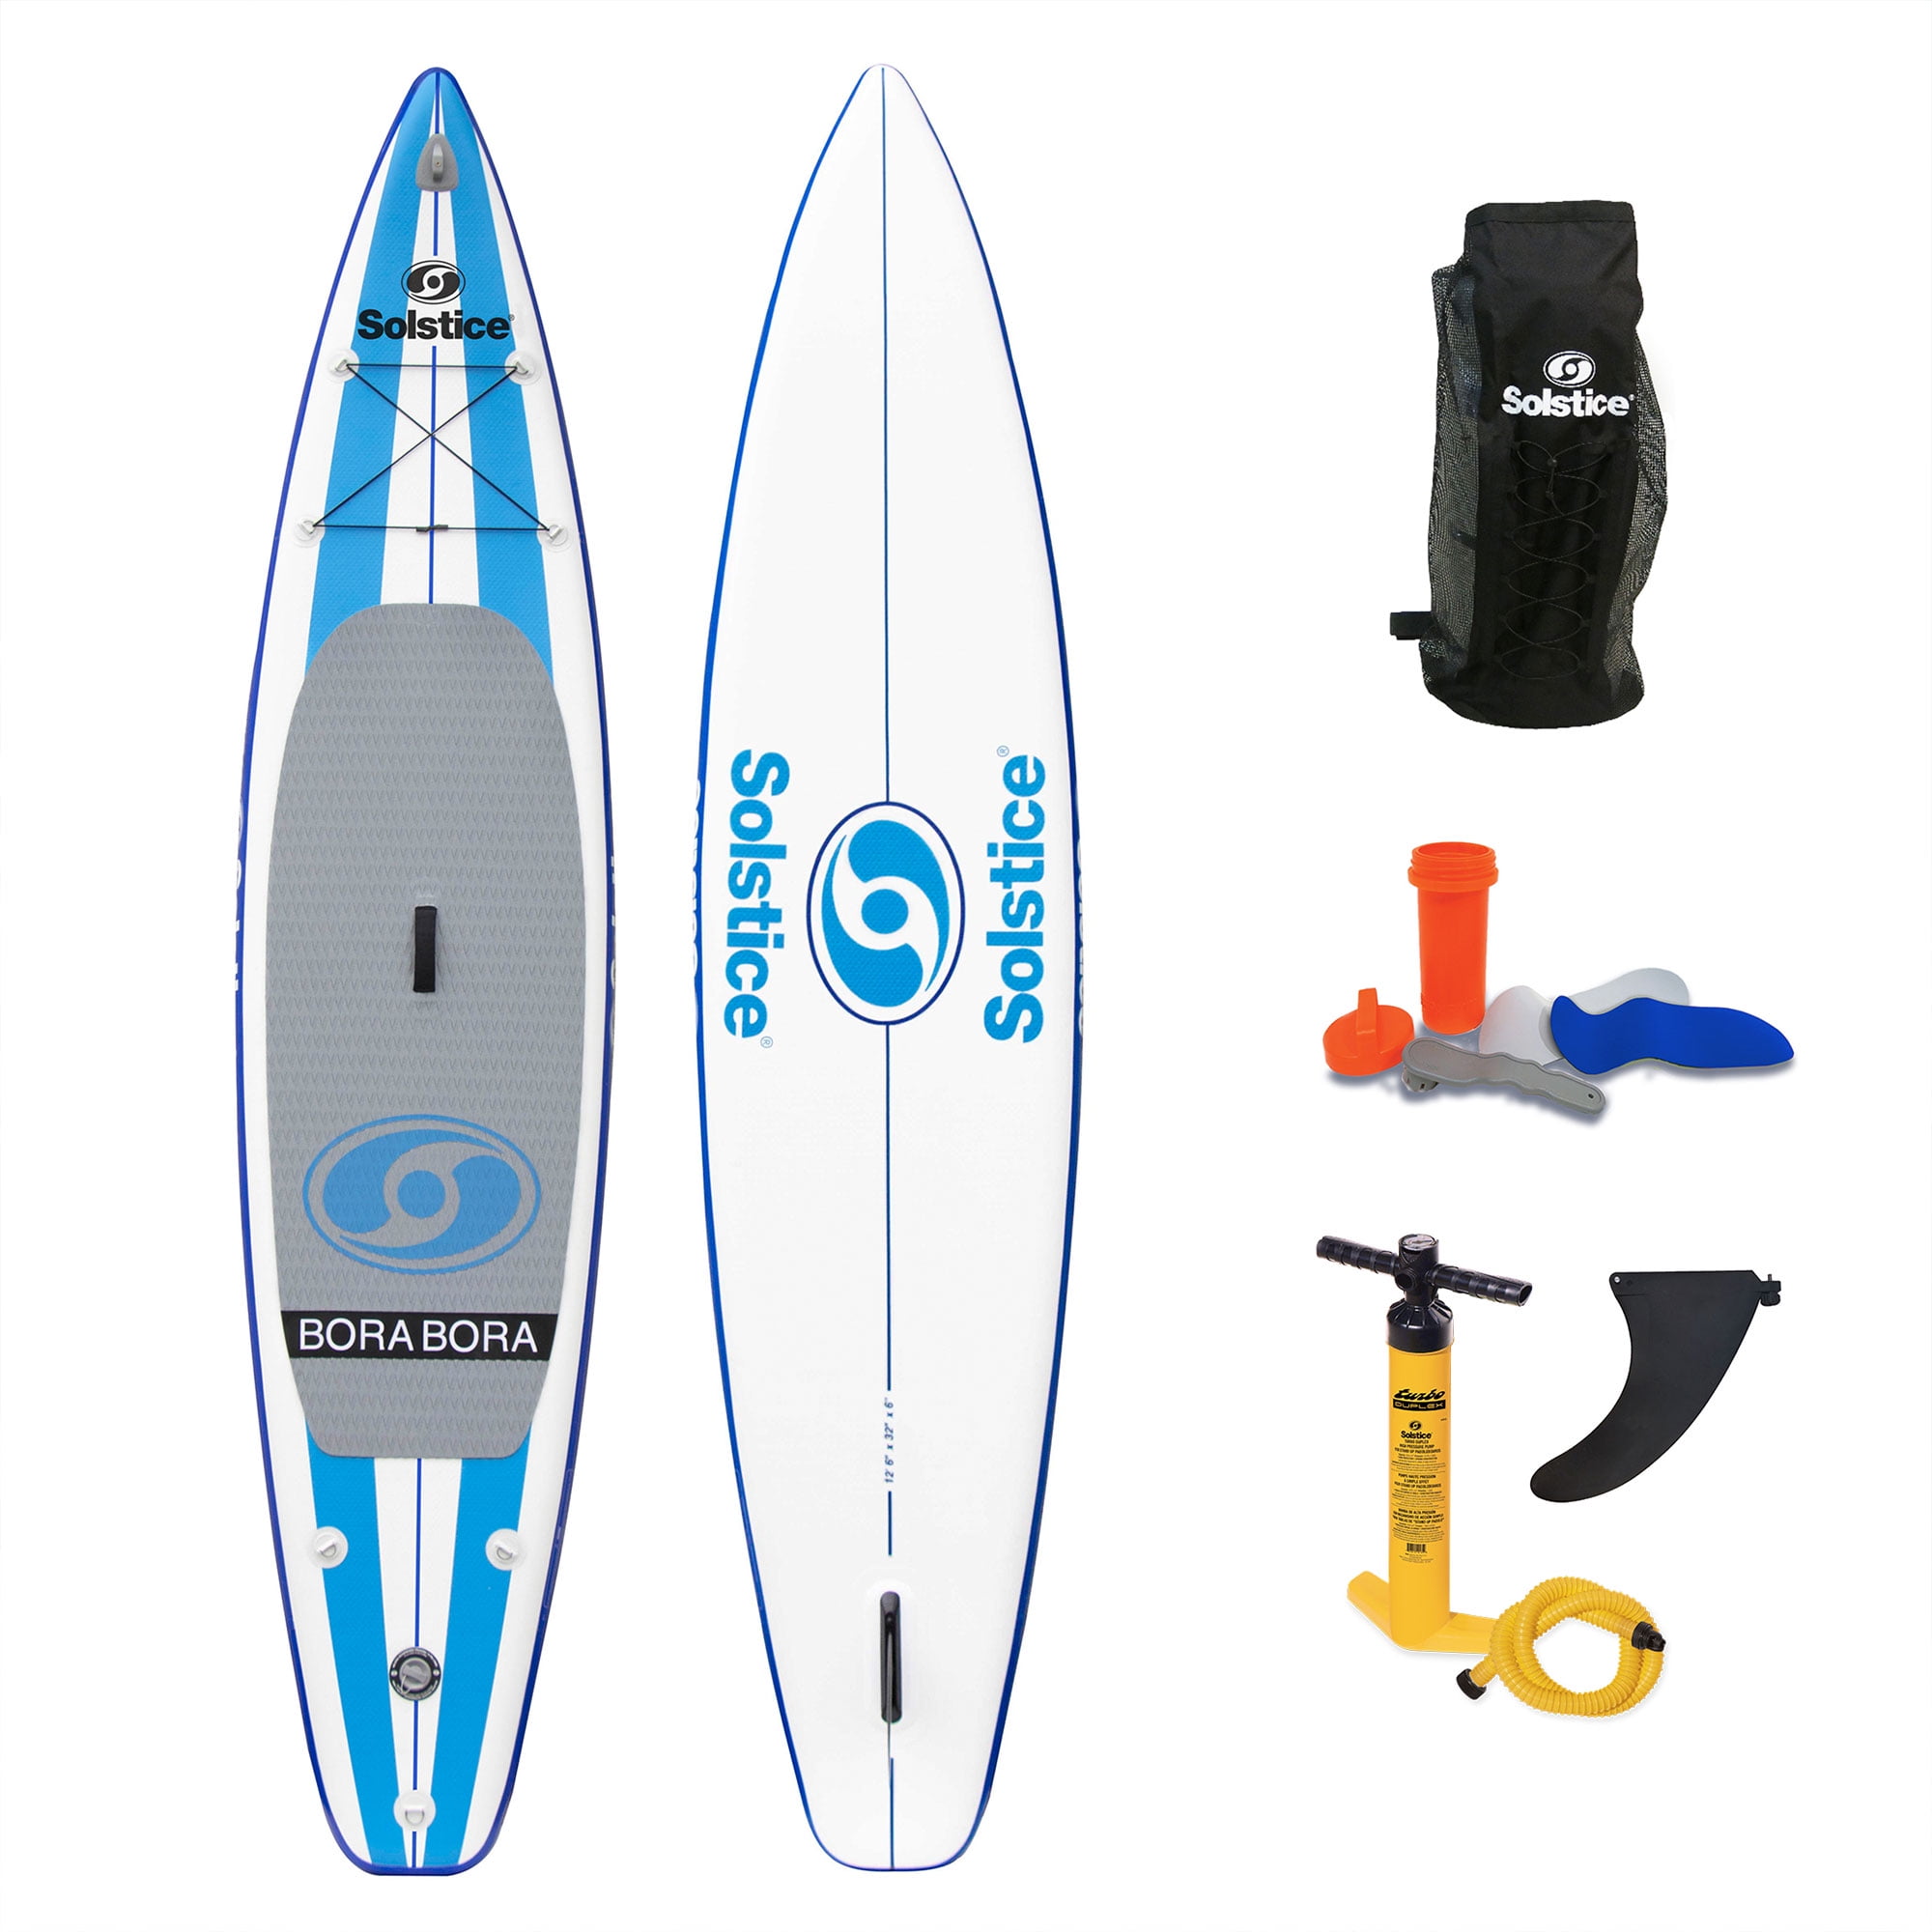 Leisure 35150 Soltce BoraBora Stand Up Paddleboard